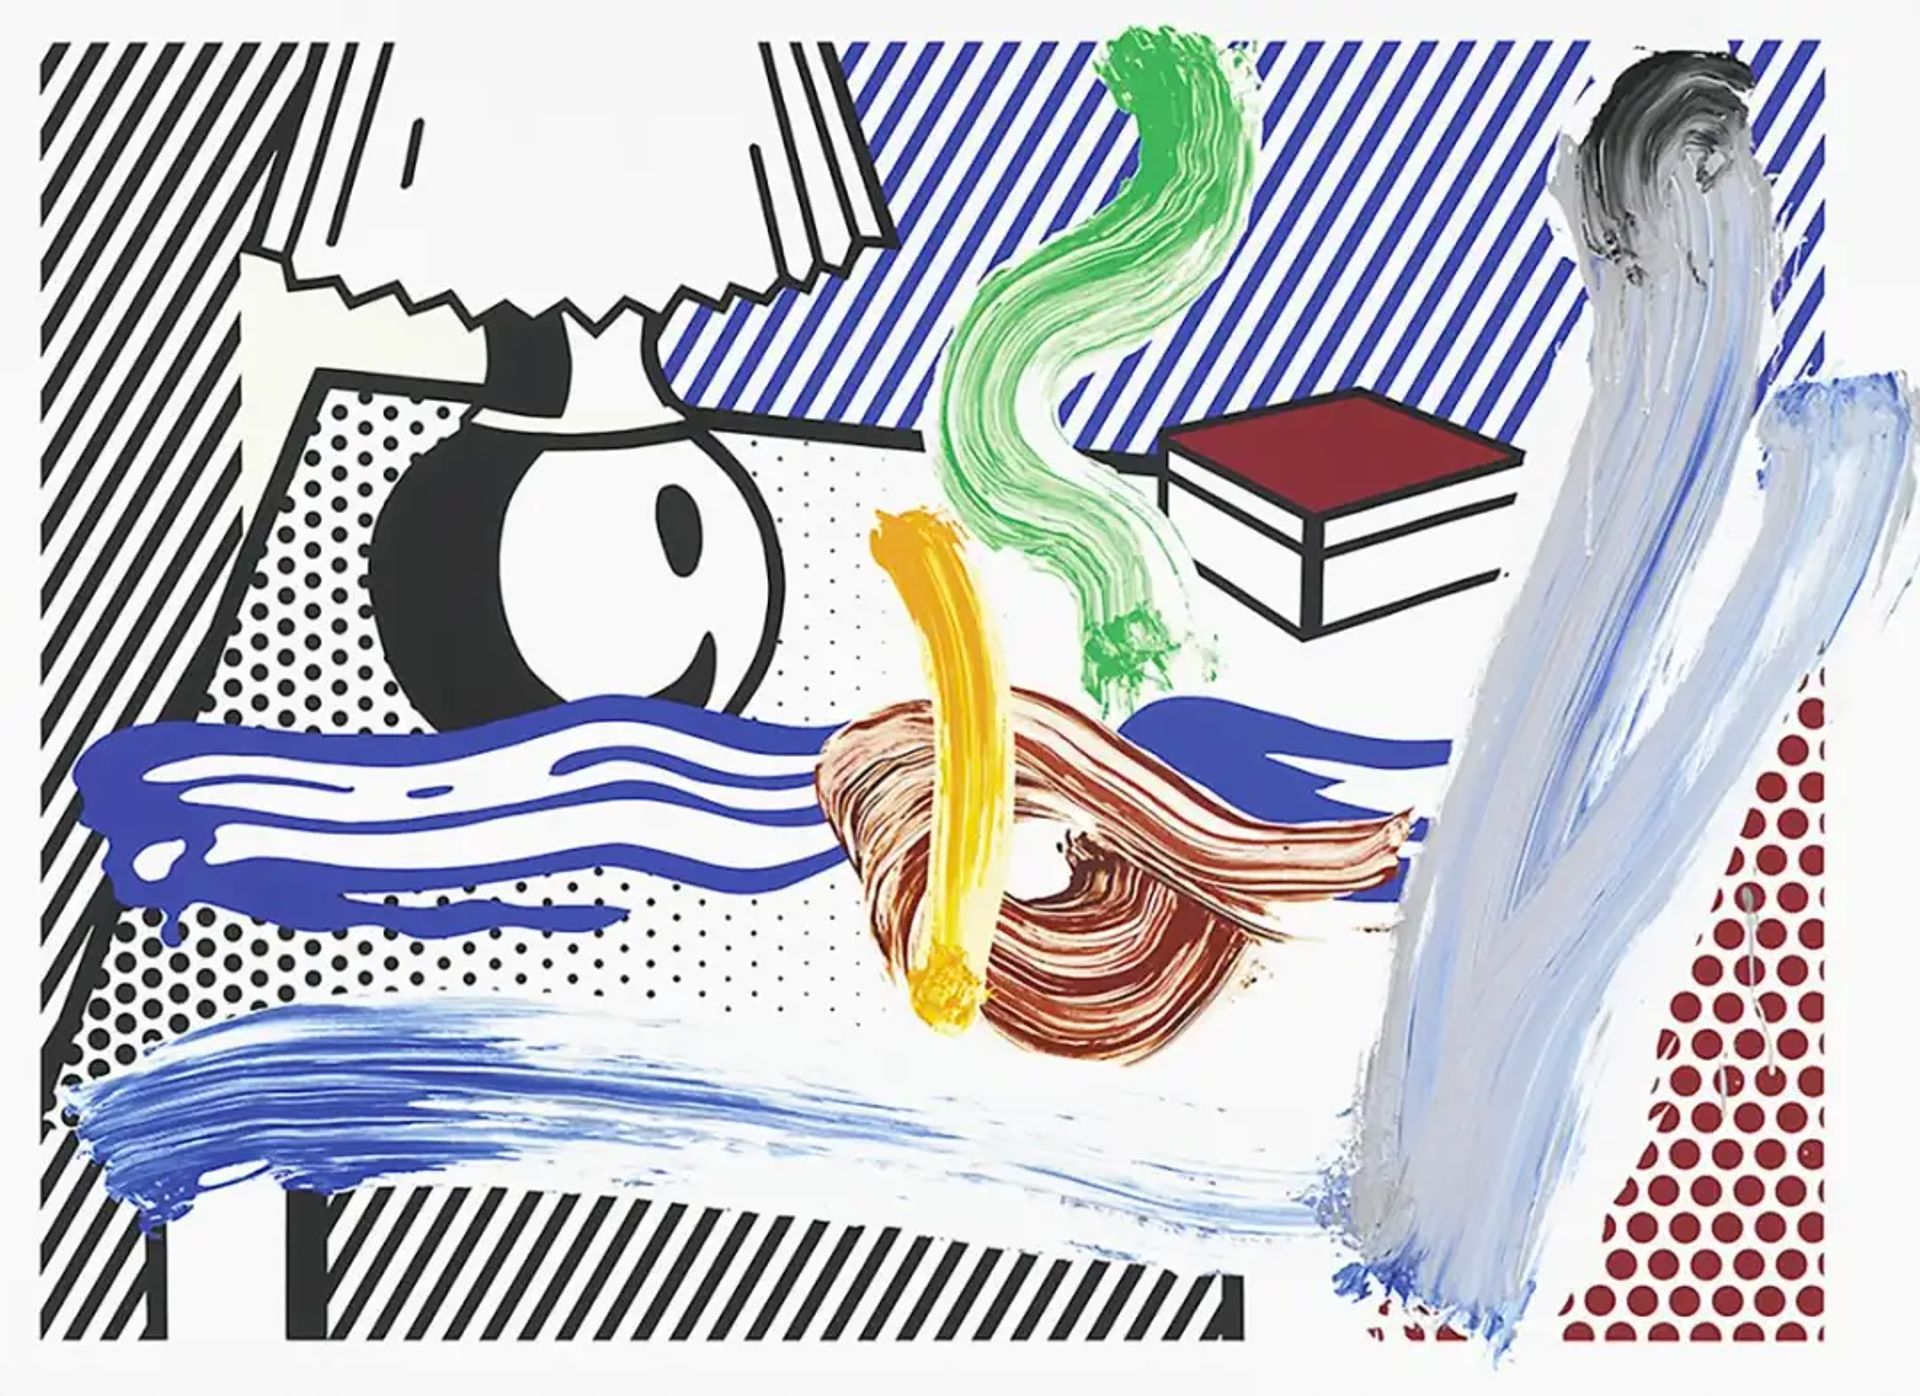 This image by Roy Lichtenstein shows a black and white lamp atop a table, next to a book. Over the composition, a series of brushstrokes are overlaid.